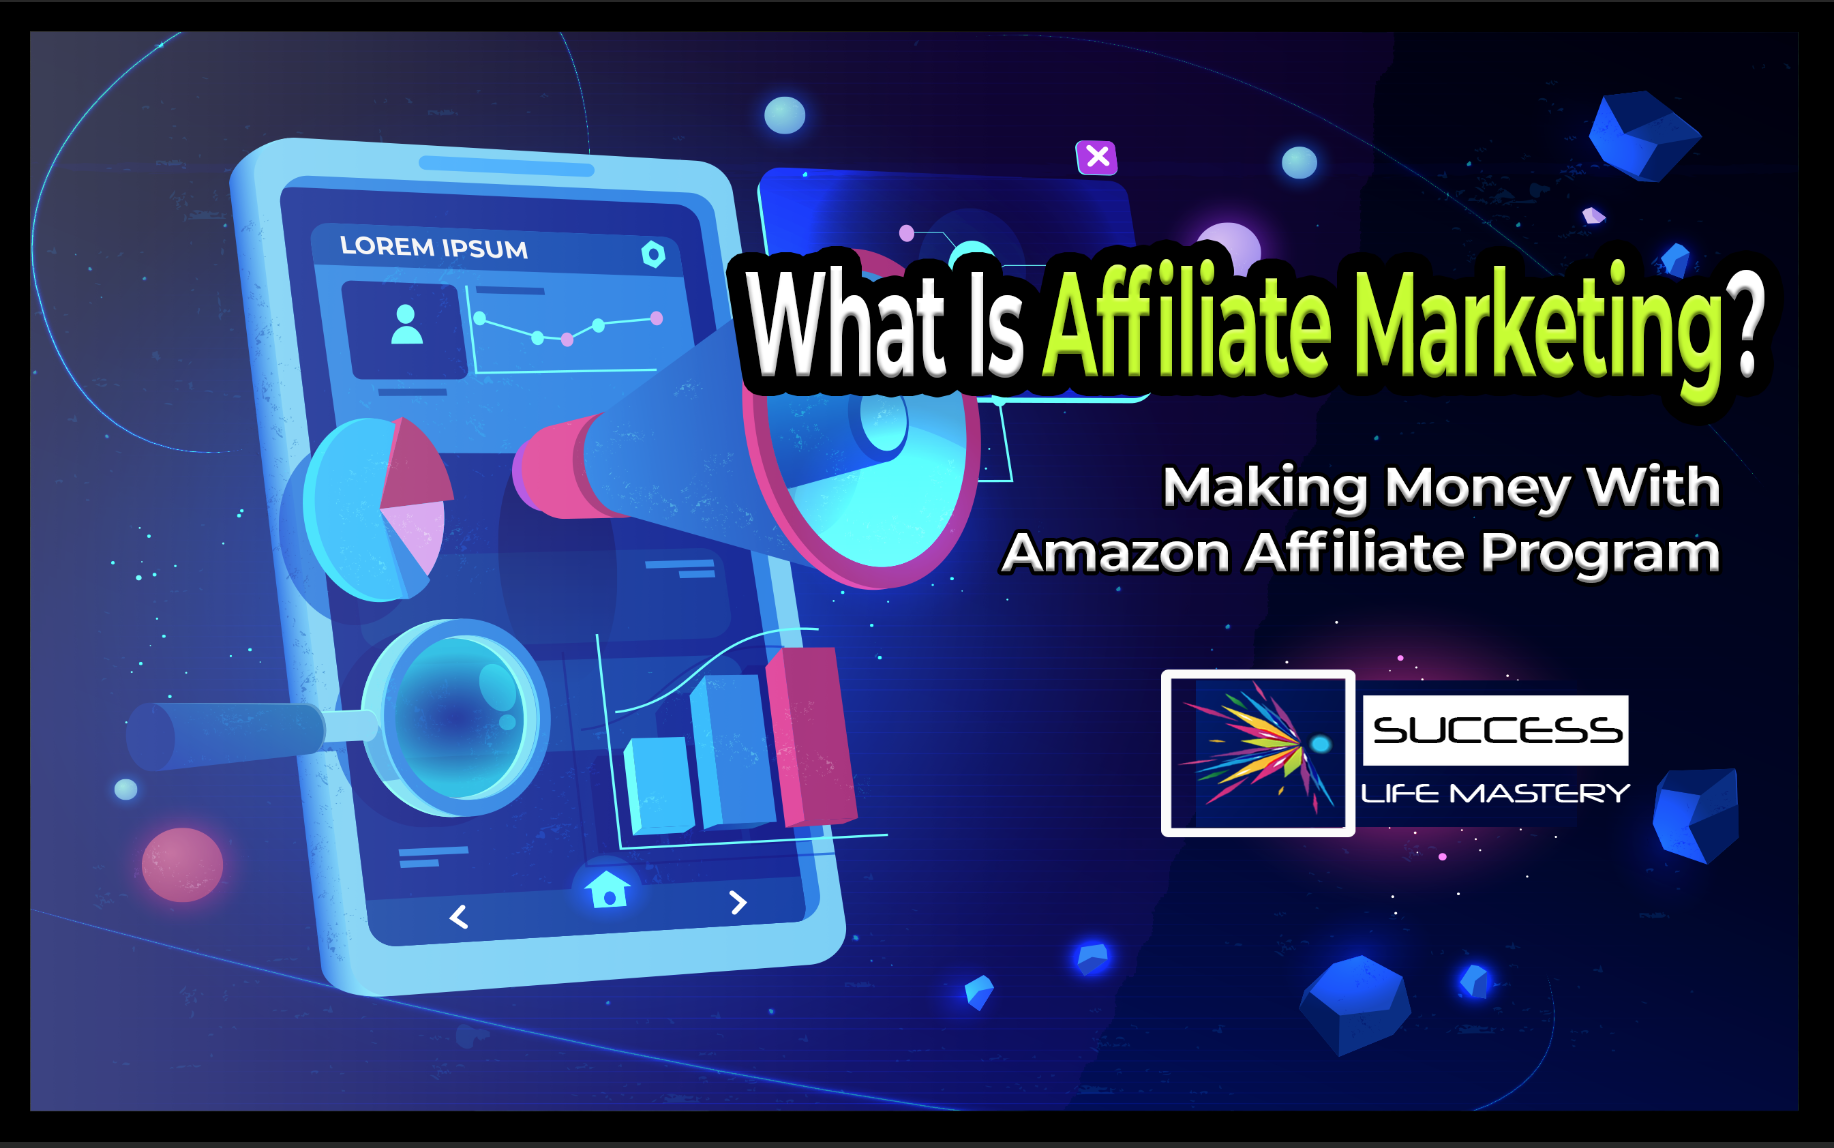 What Is Affiliate Marketing? Making Money With Amazon Affiliate Program